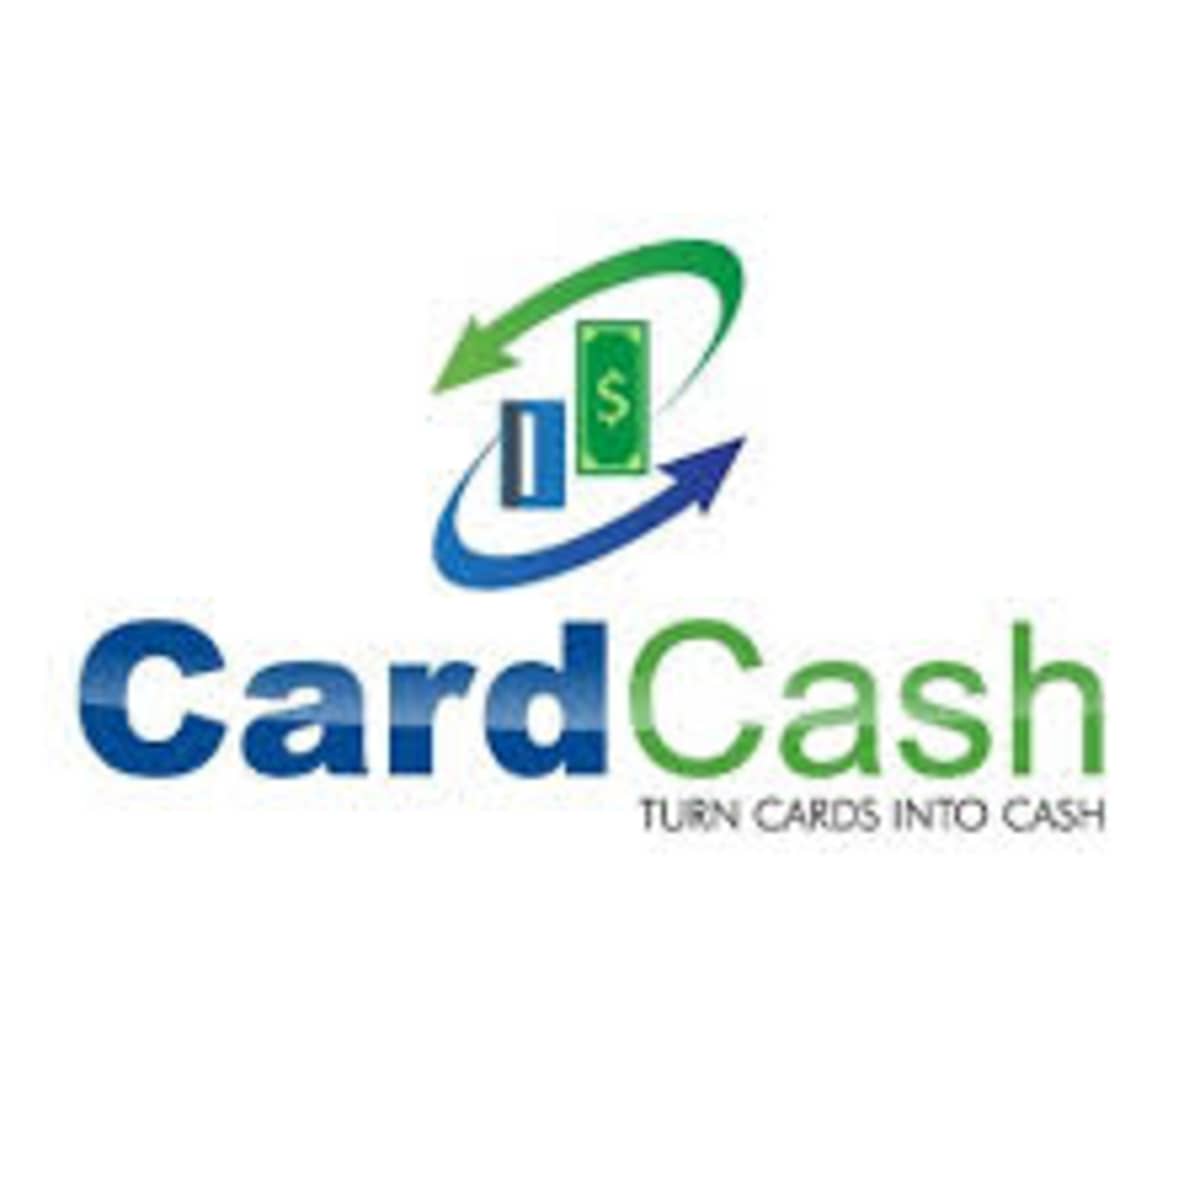 Cash for gift cards machine | Card machine, Cash gift card, Cards